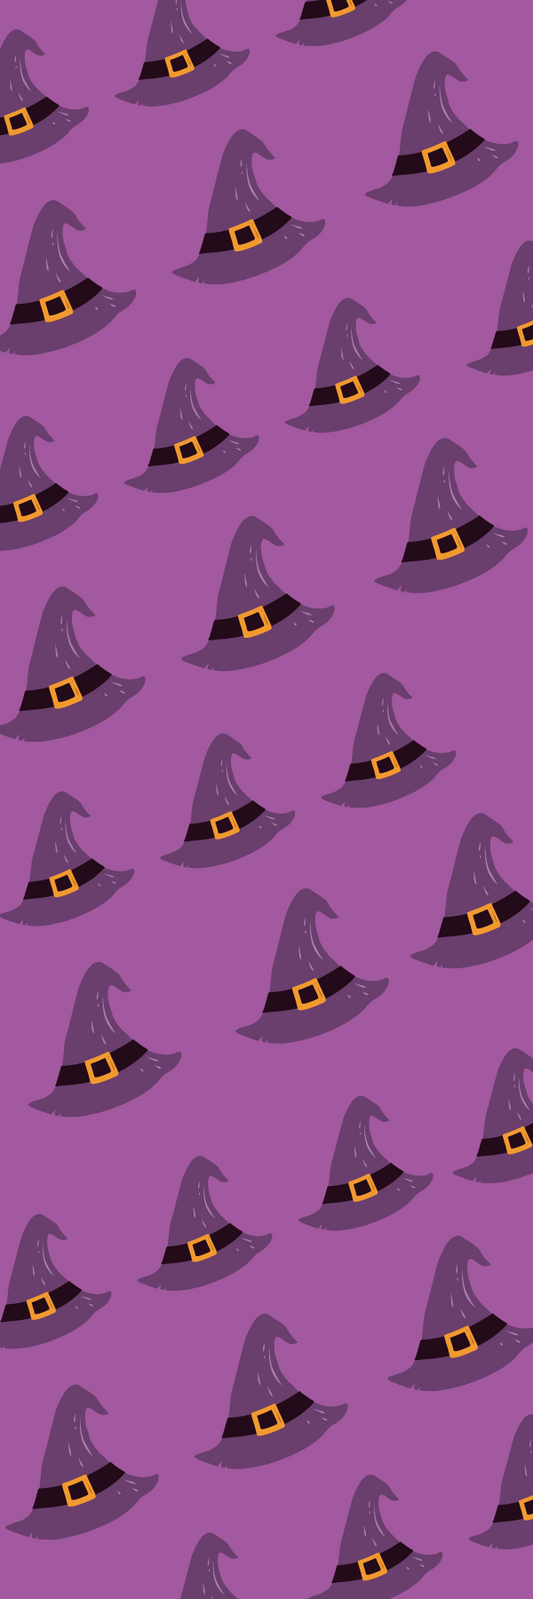 The witches hats are brewing Bookmark